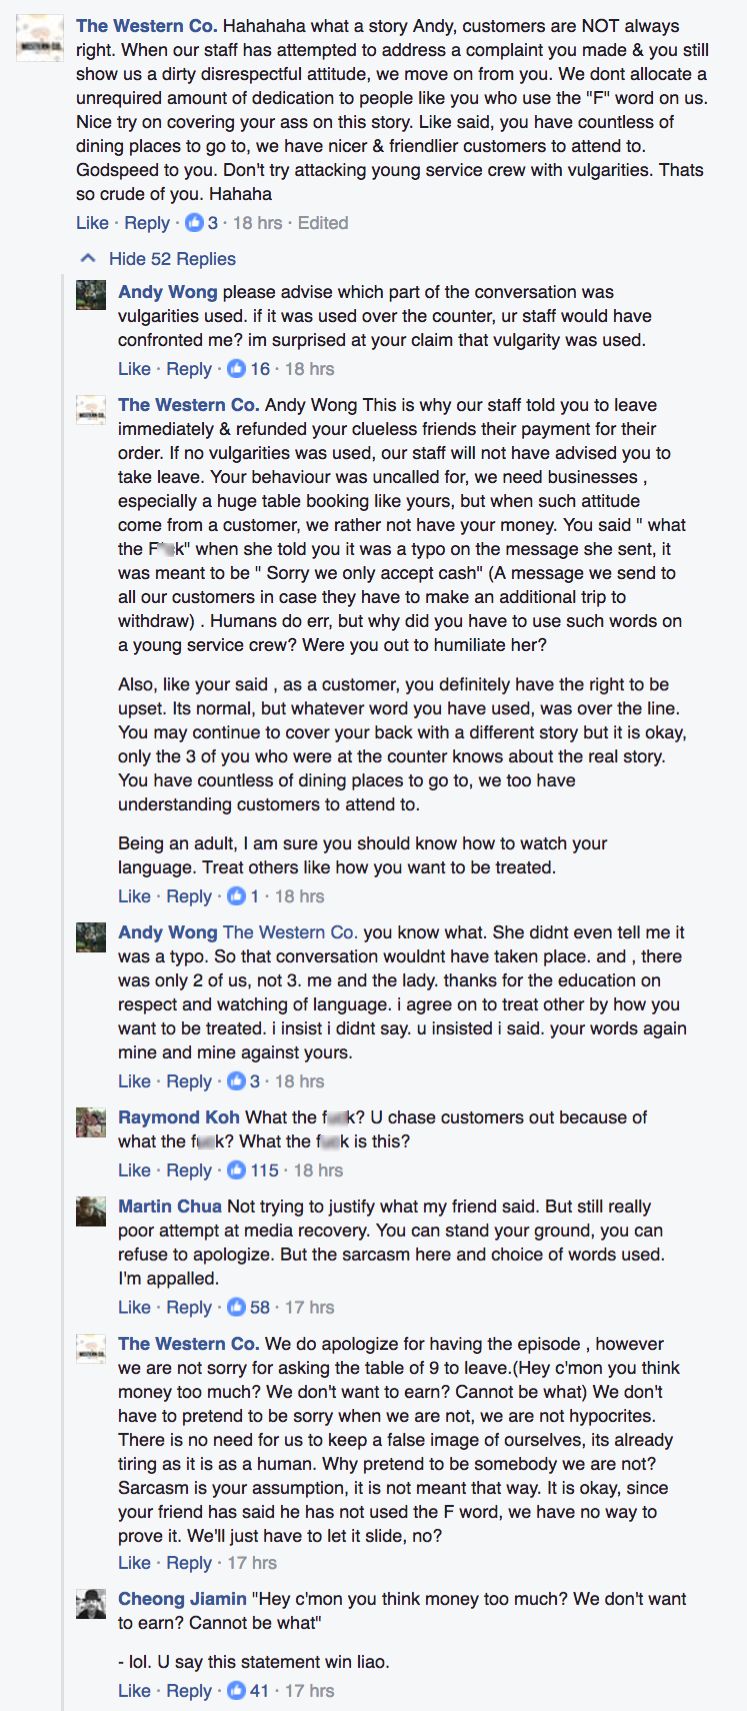 Screenshot from Andy Wong's Facebook post